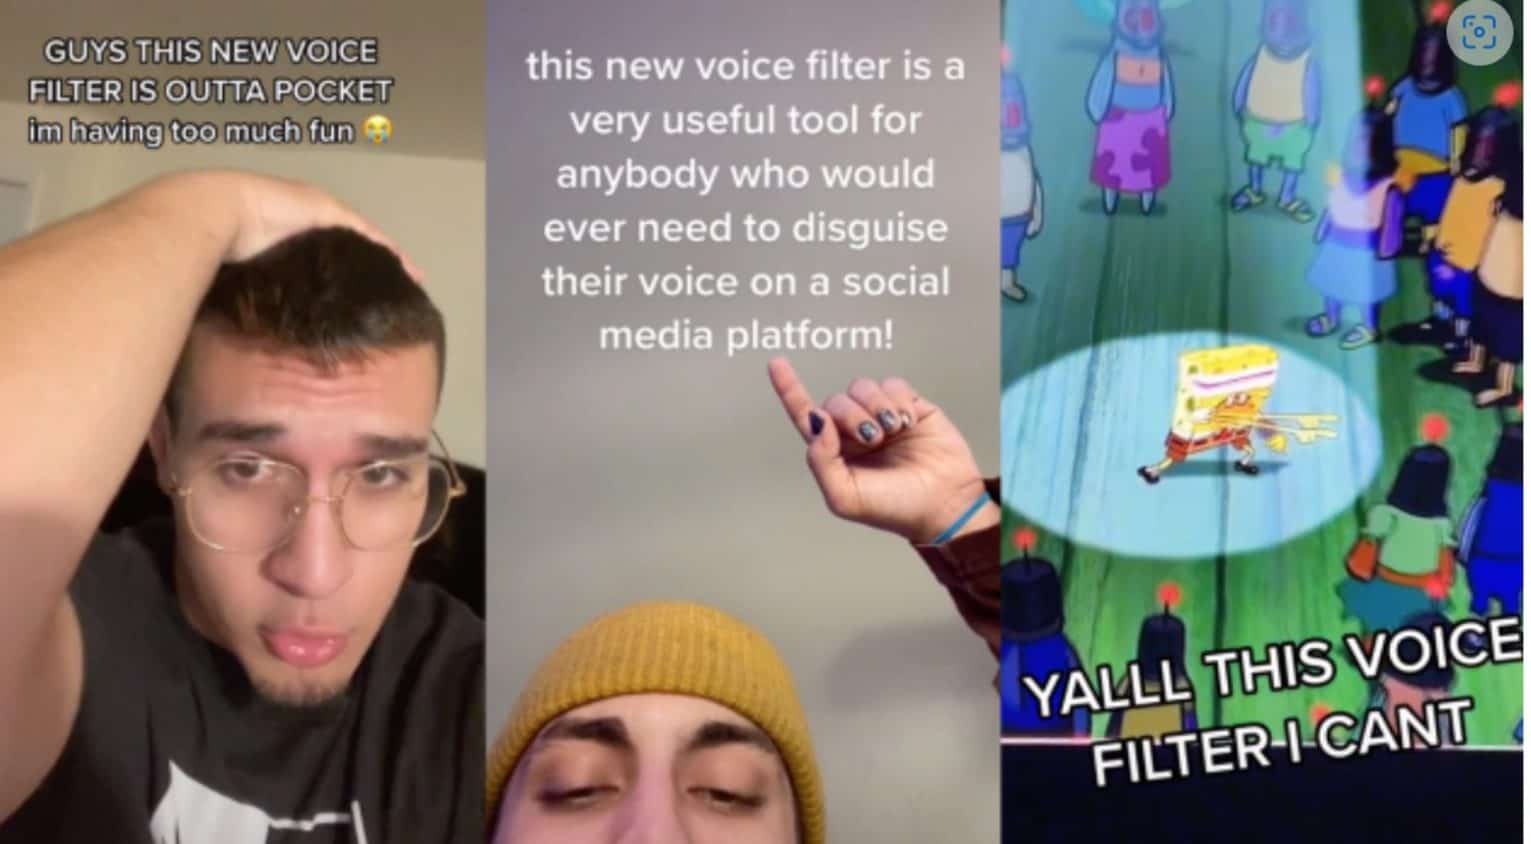 How To Use The Voice Filter On Tiktok?